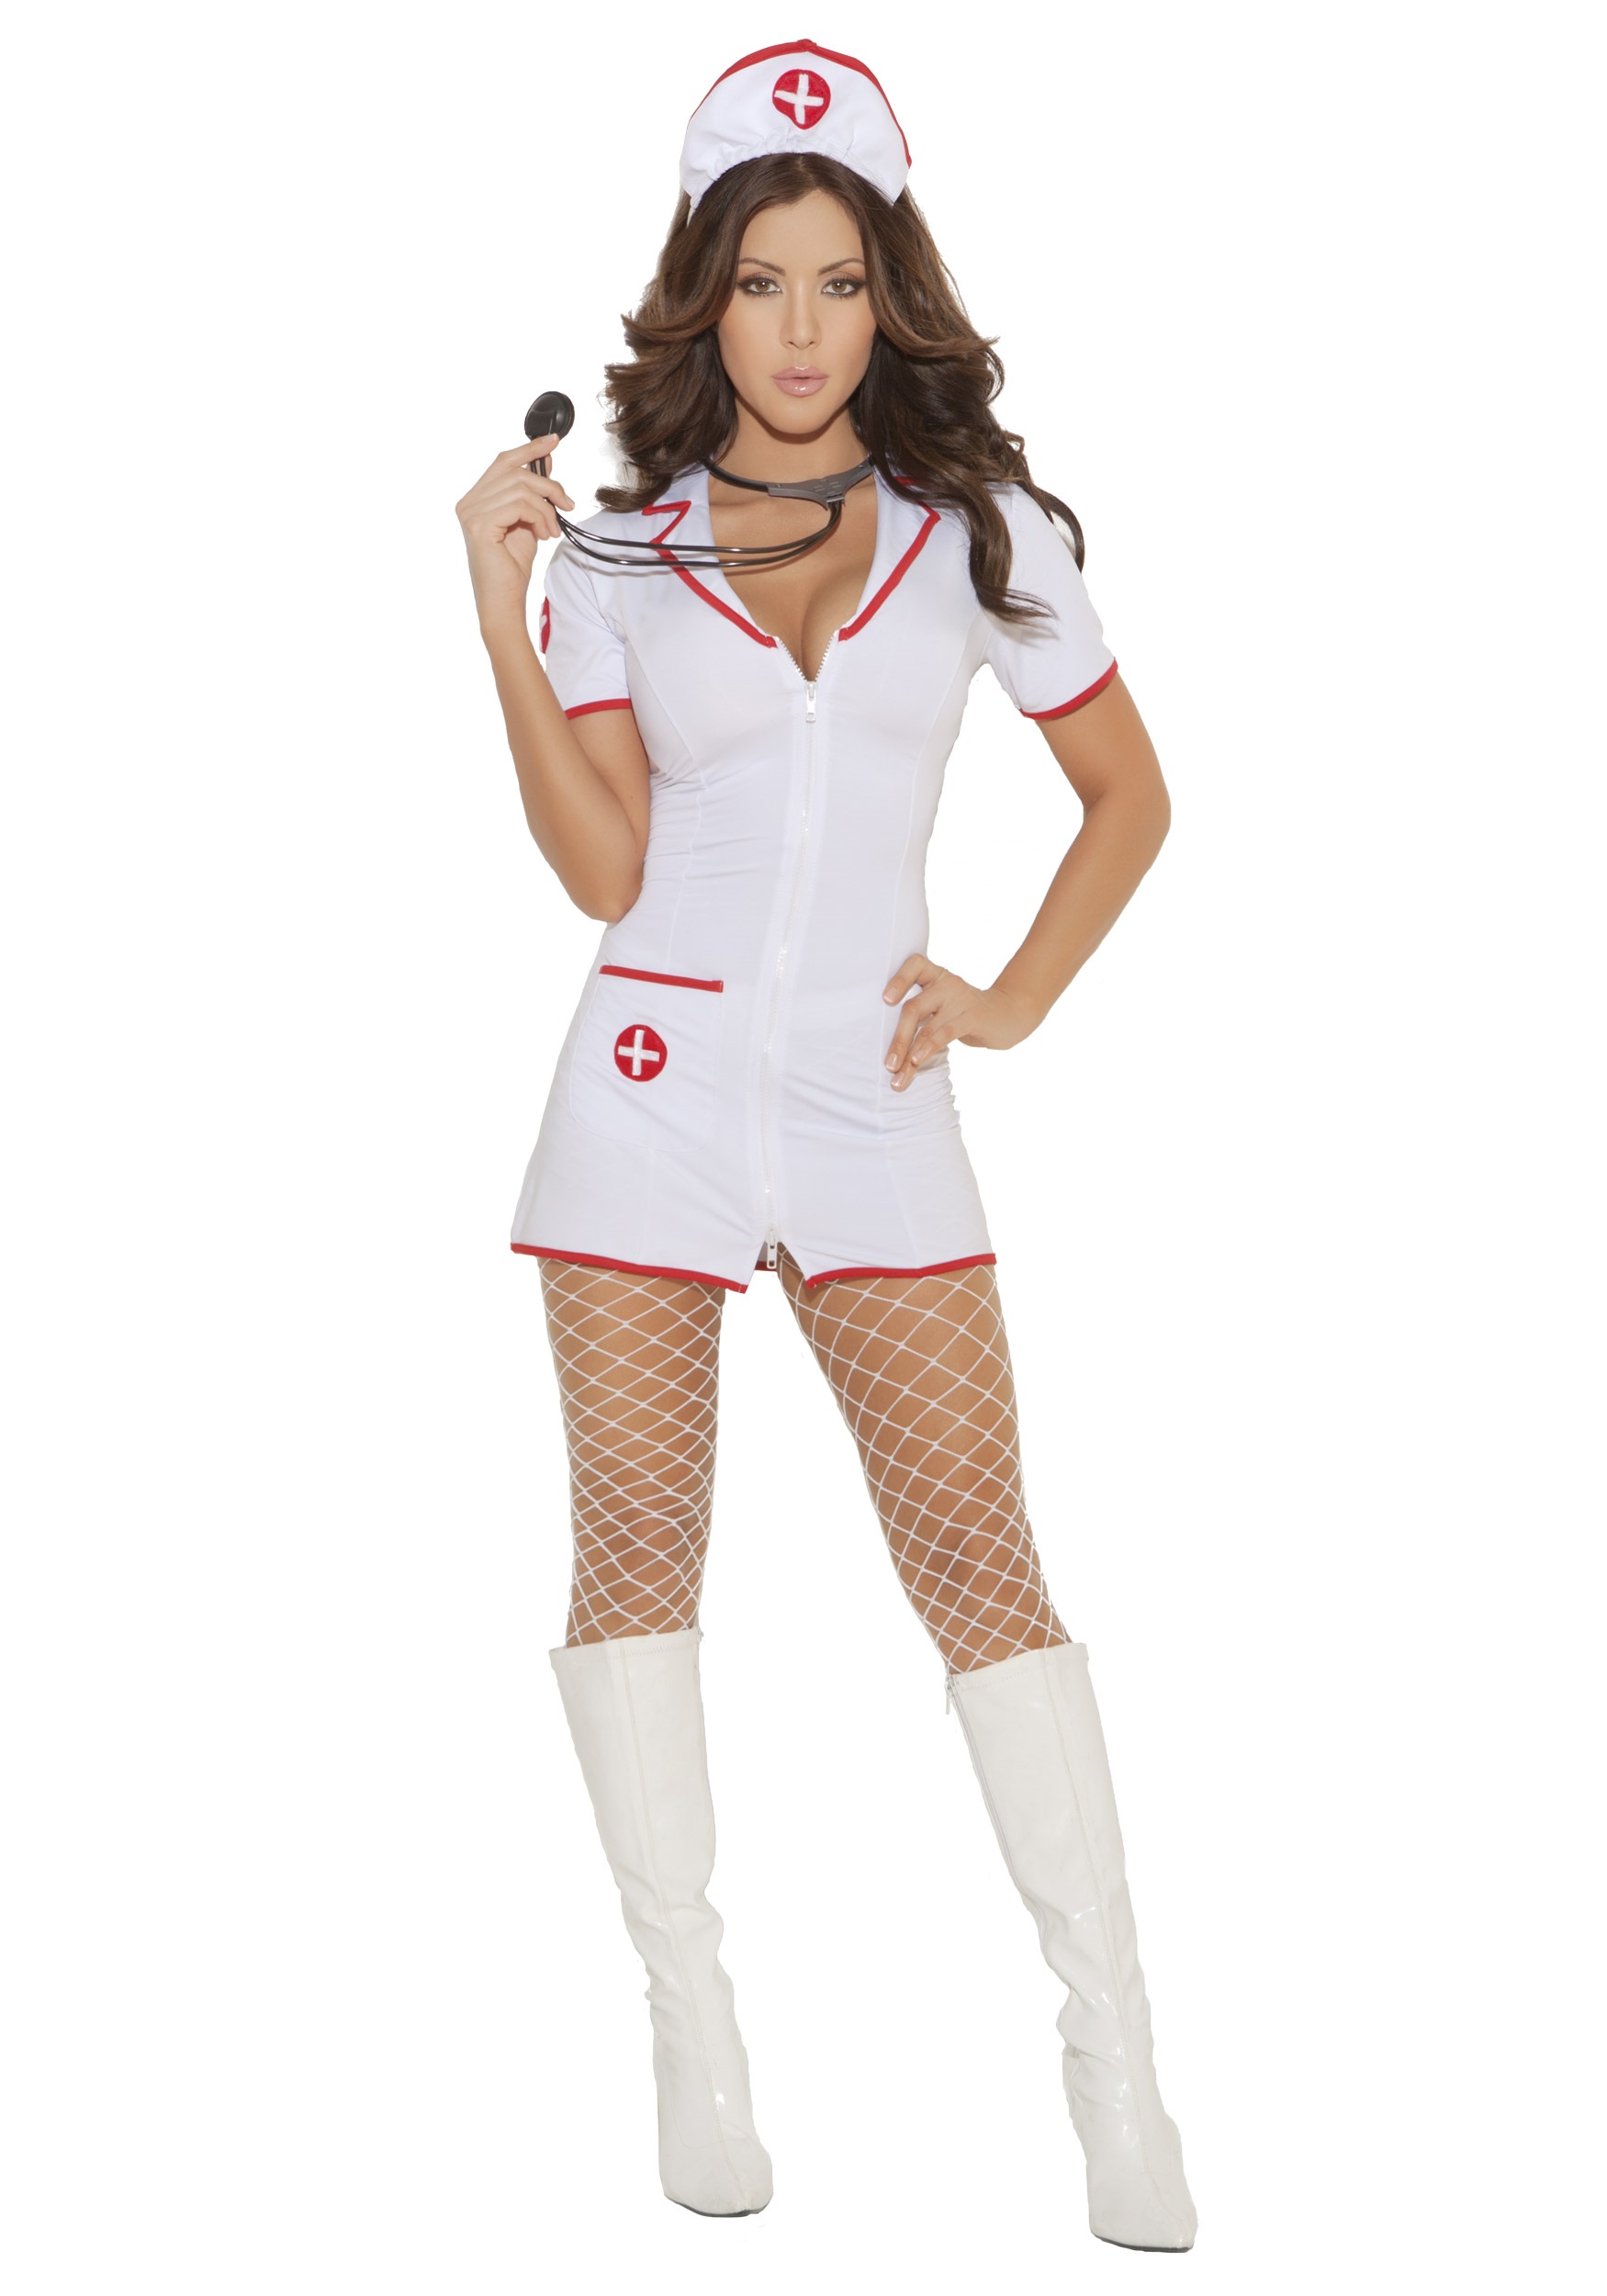 Head Nurse Costume for Women W/ Hat and White Dress